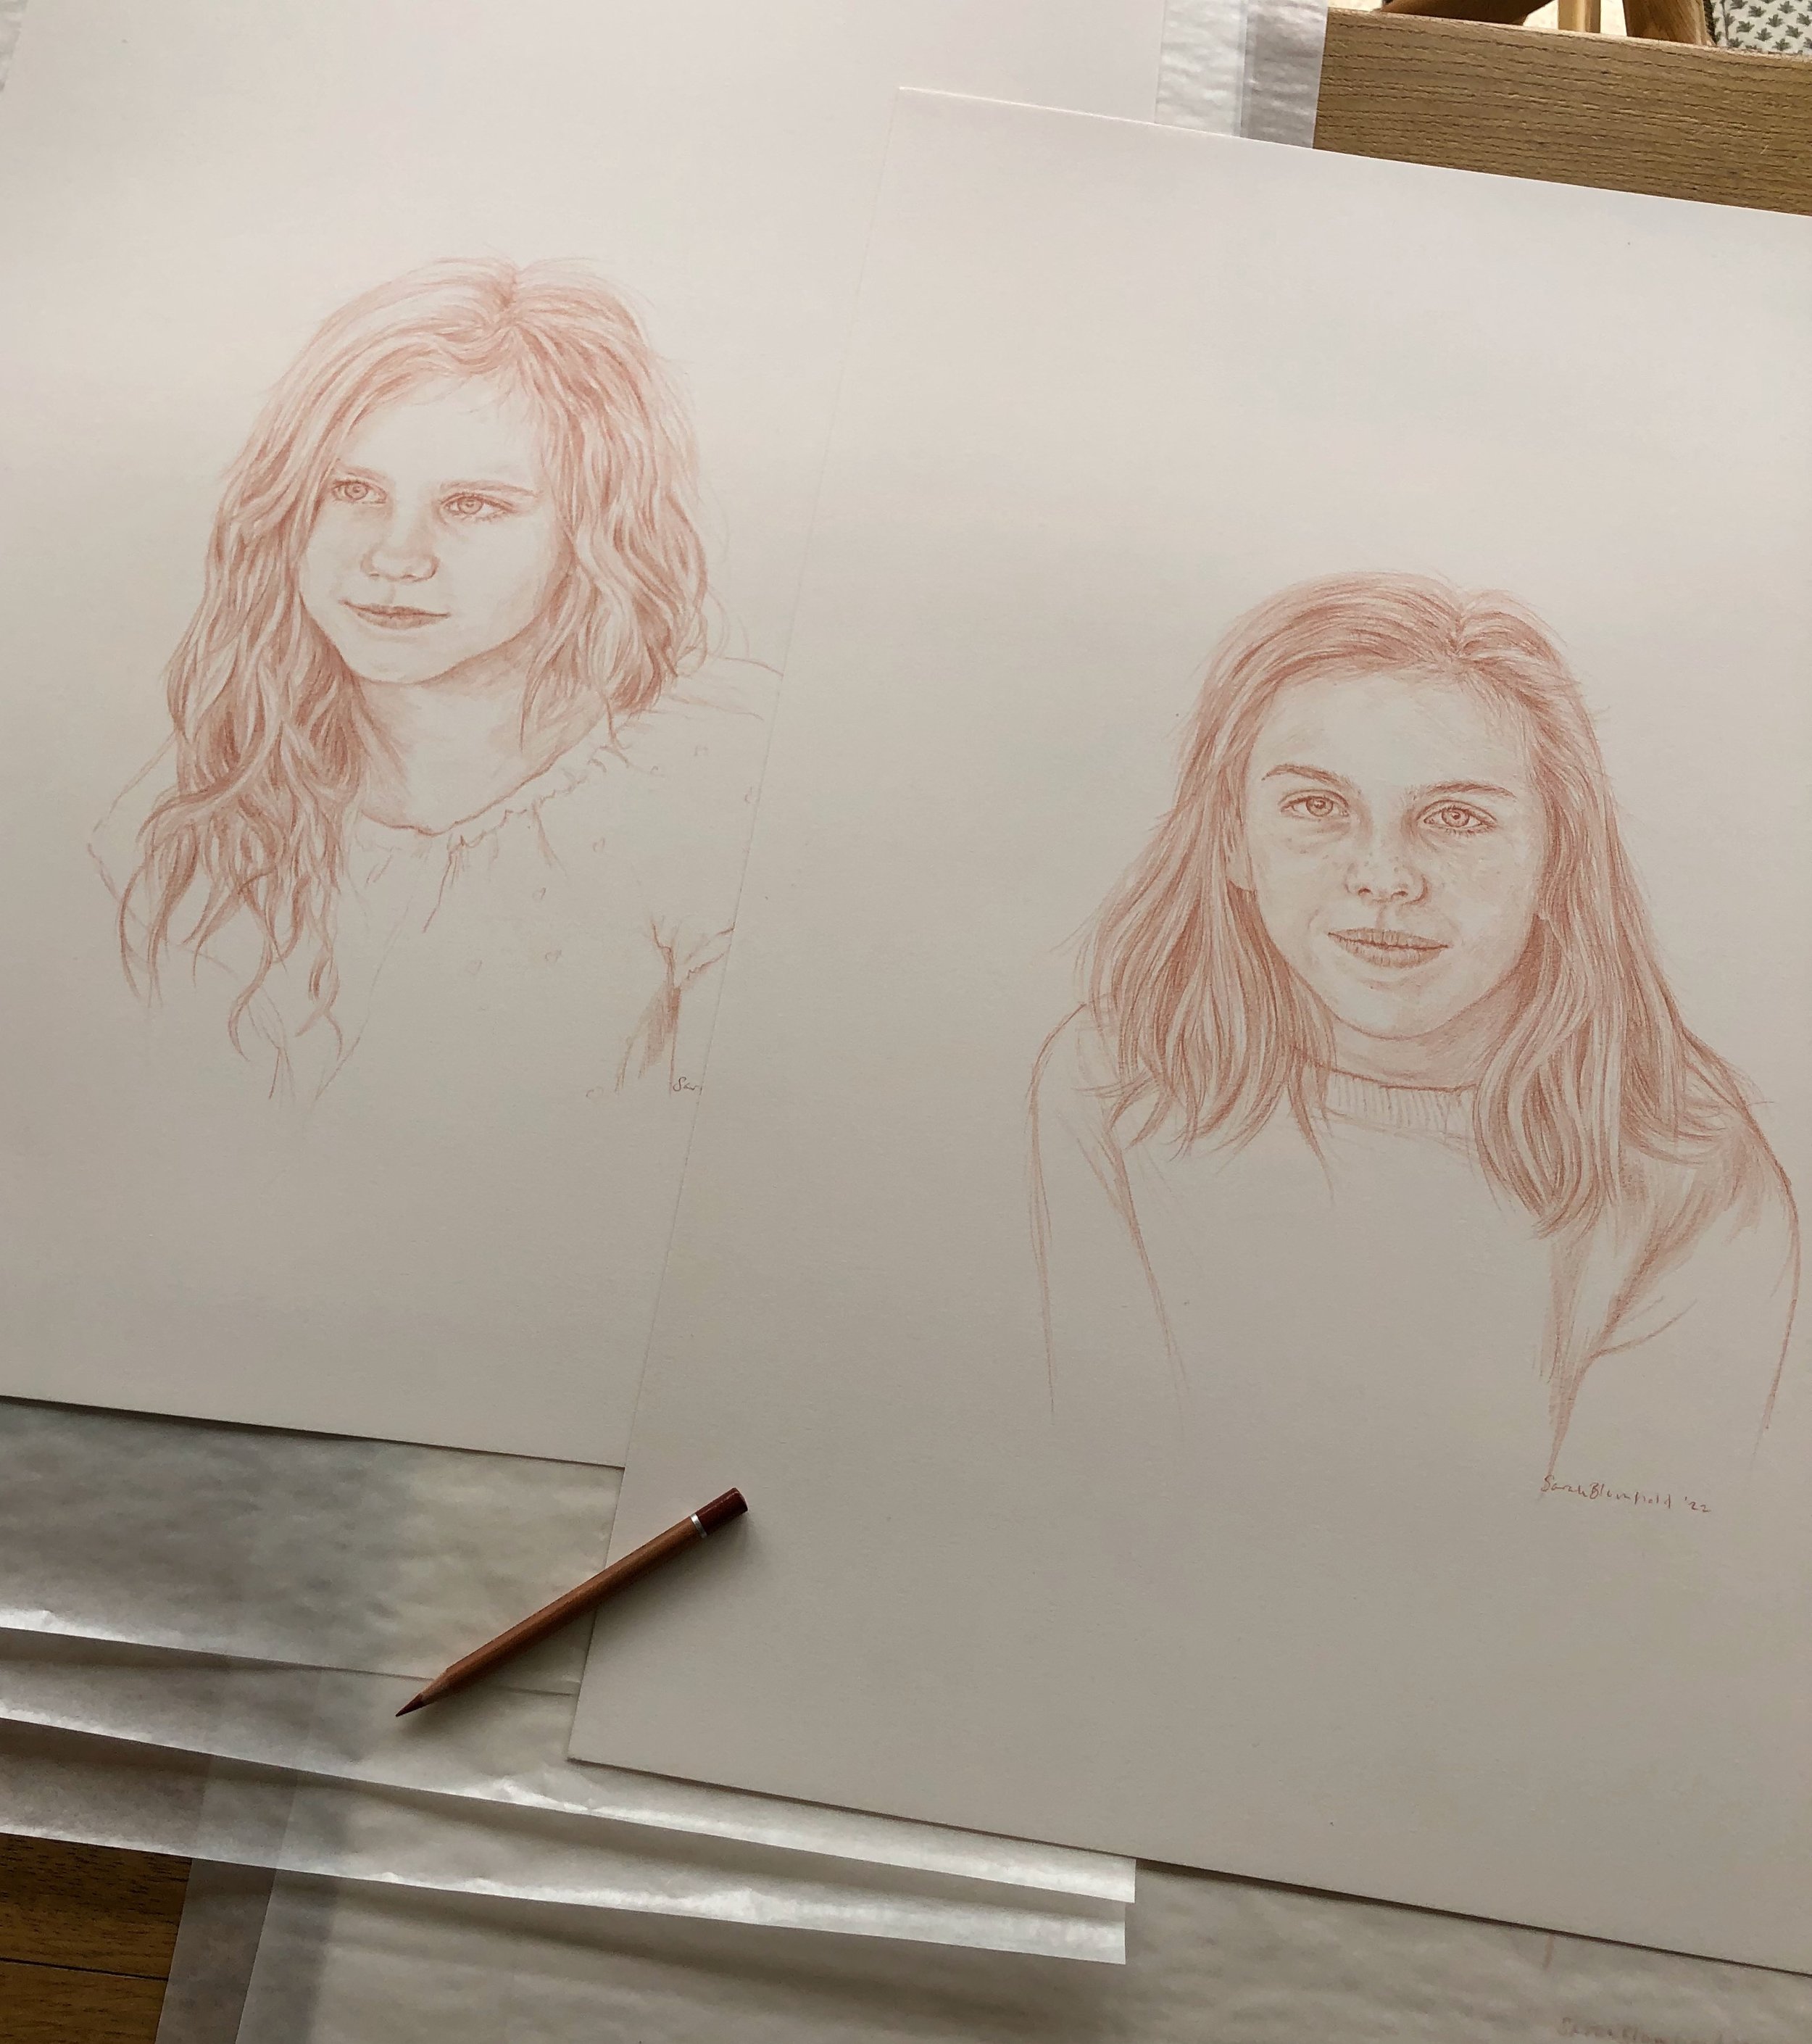 all pencil portraits are on off white paper, hard to photograph!